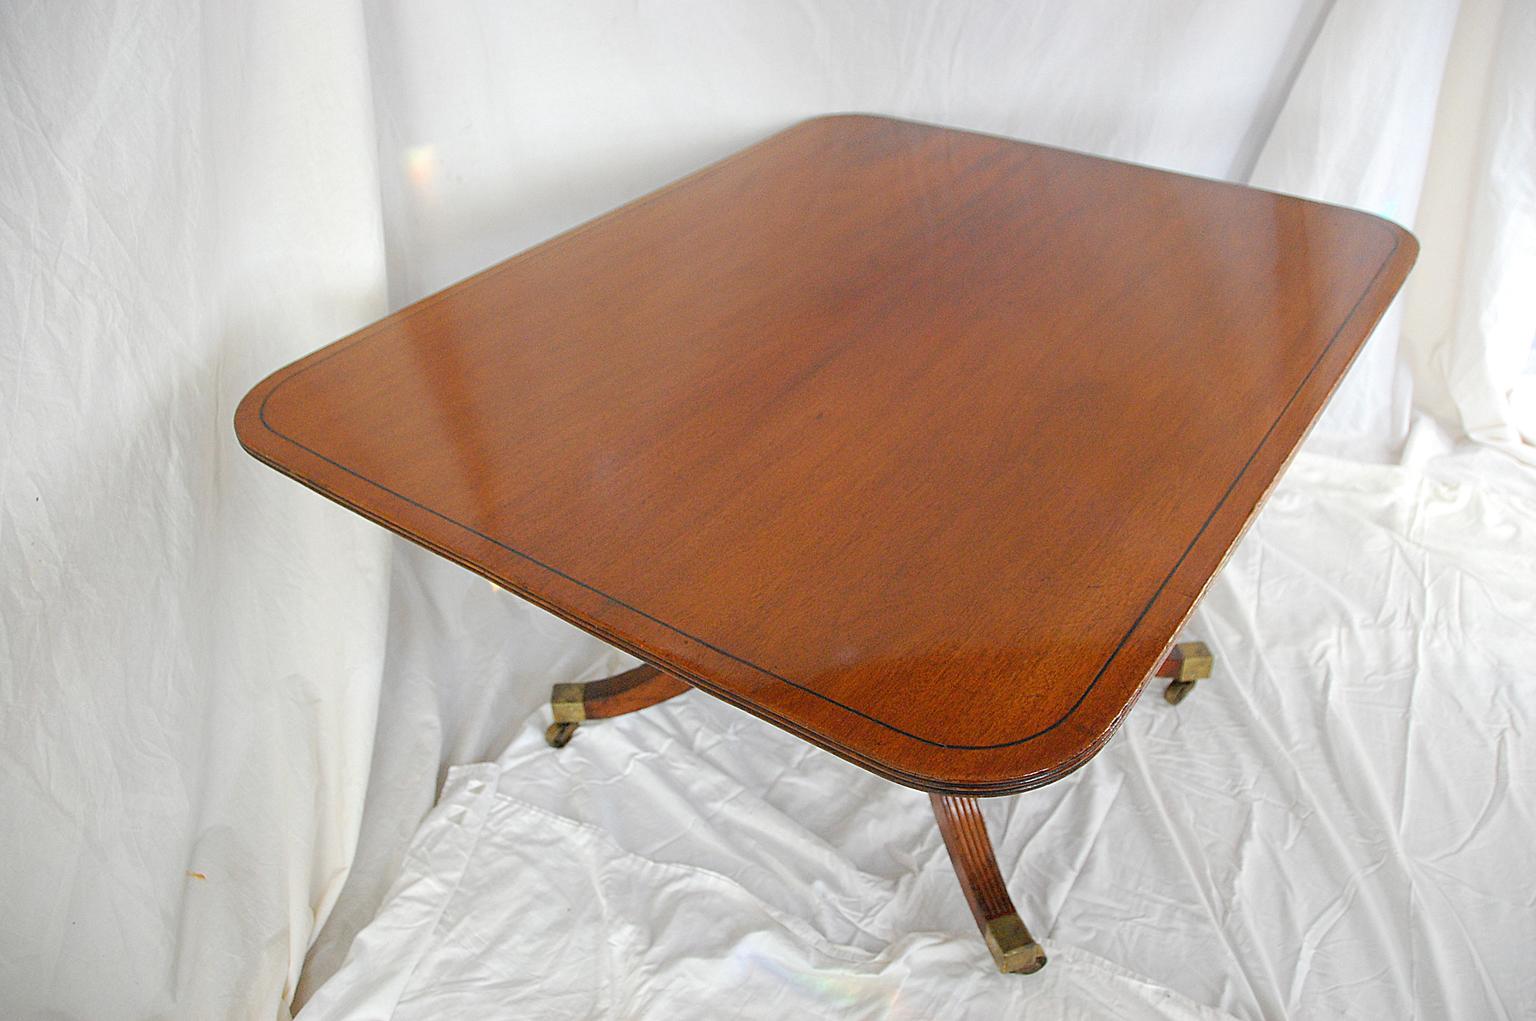 English Regency Period Mahogany Single Pedestal Dining Table with Ebony Stringin In Good Condition For Sale In Wells, ME